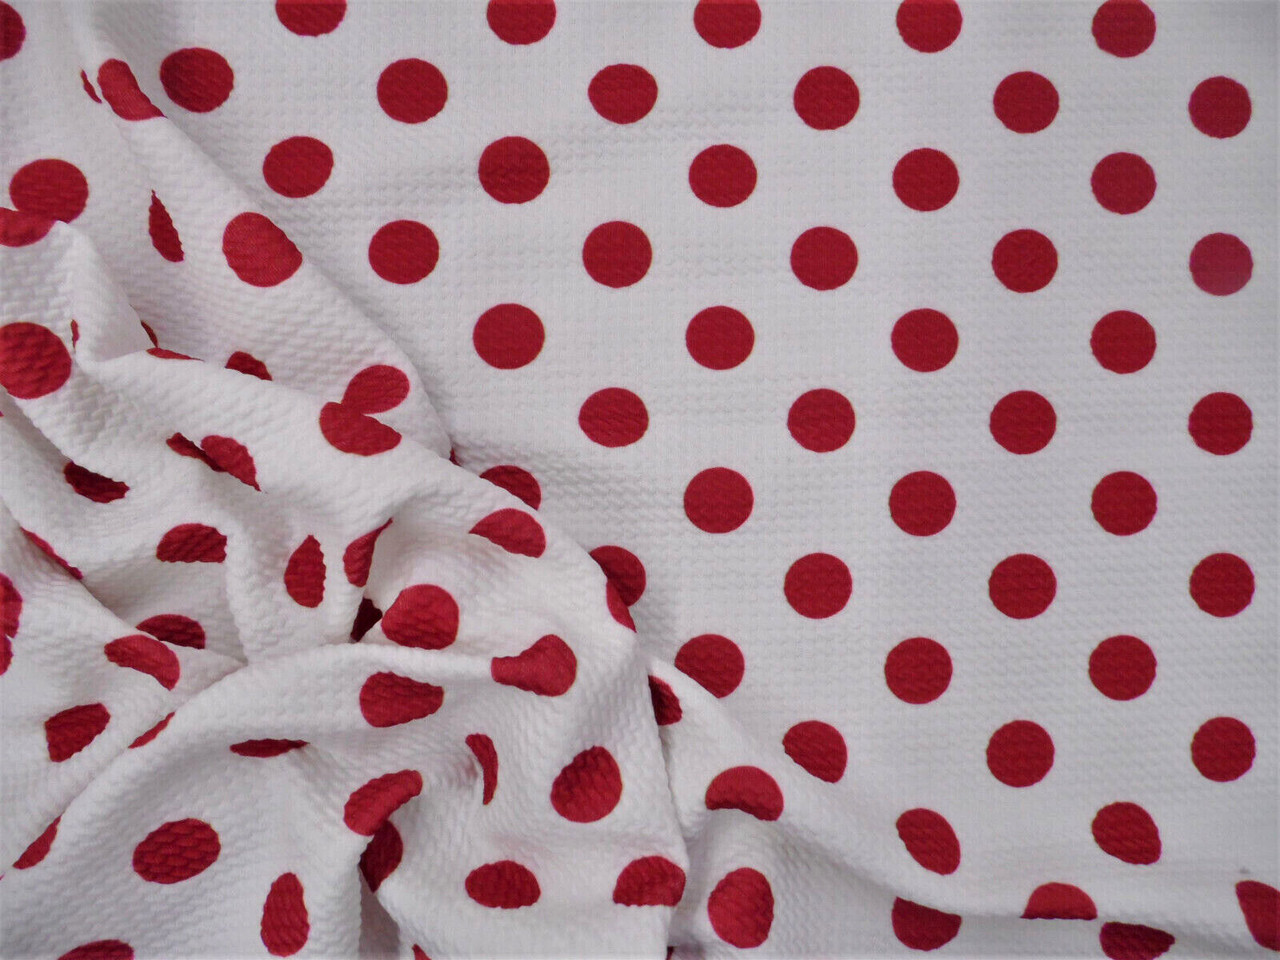 Bullet Printed Liverpool Textured Fabric 4 way Stretch White Red Polka Dot V36